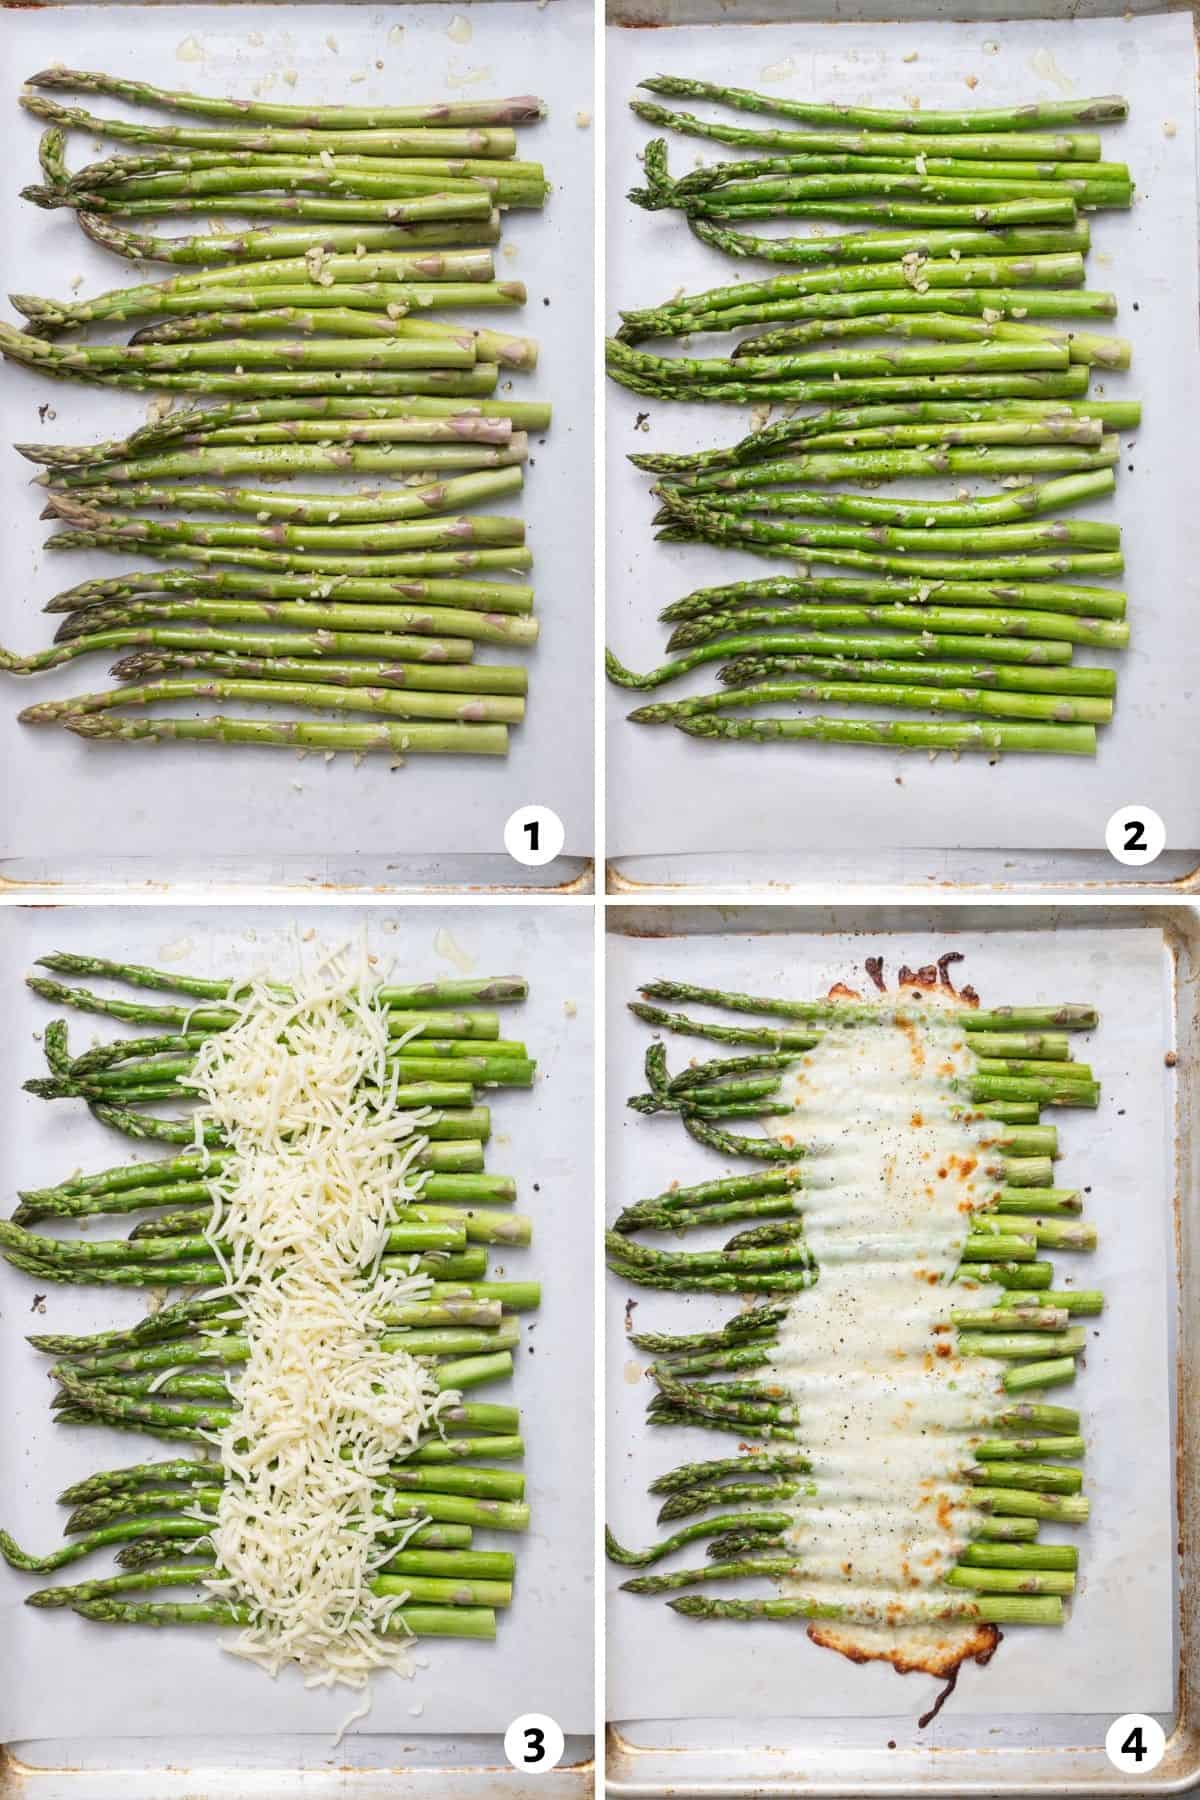 4 image collage to show the asparagus on parchment paper, then seasoned, then with cheese on top and then after roasting